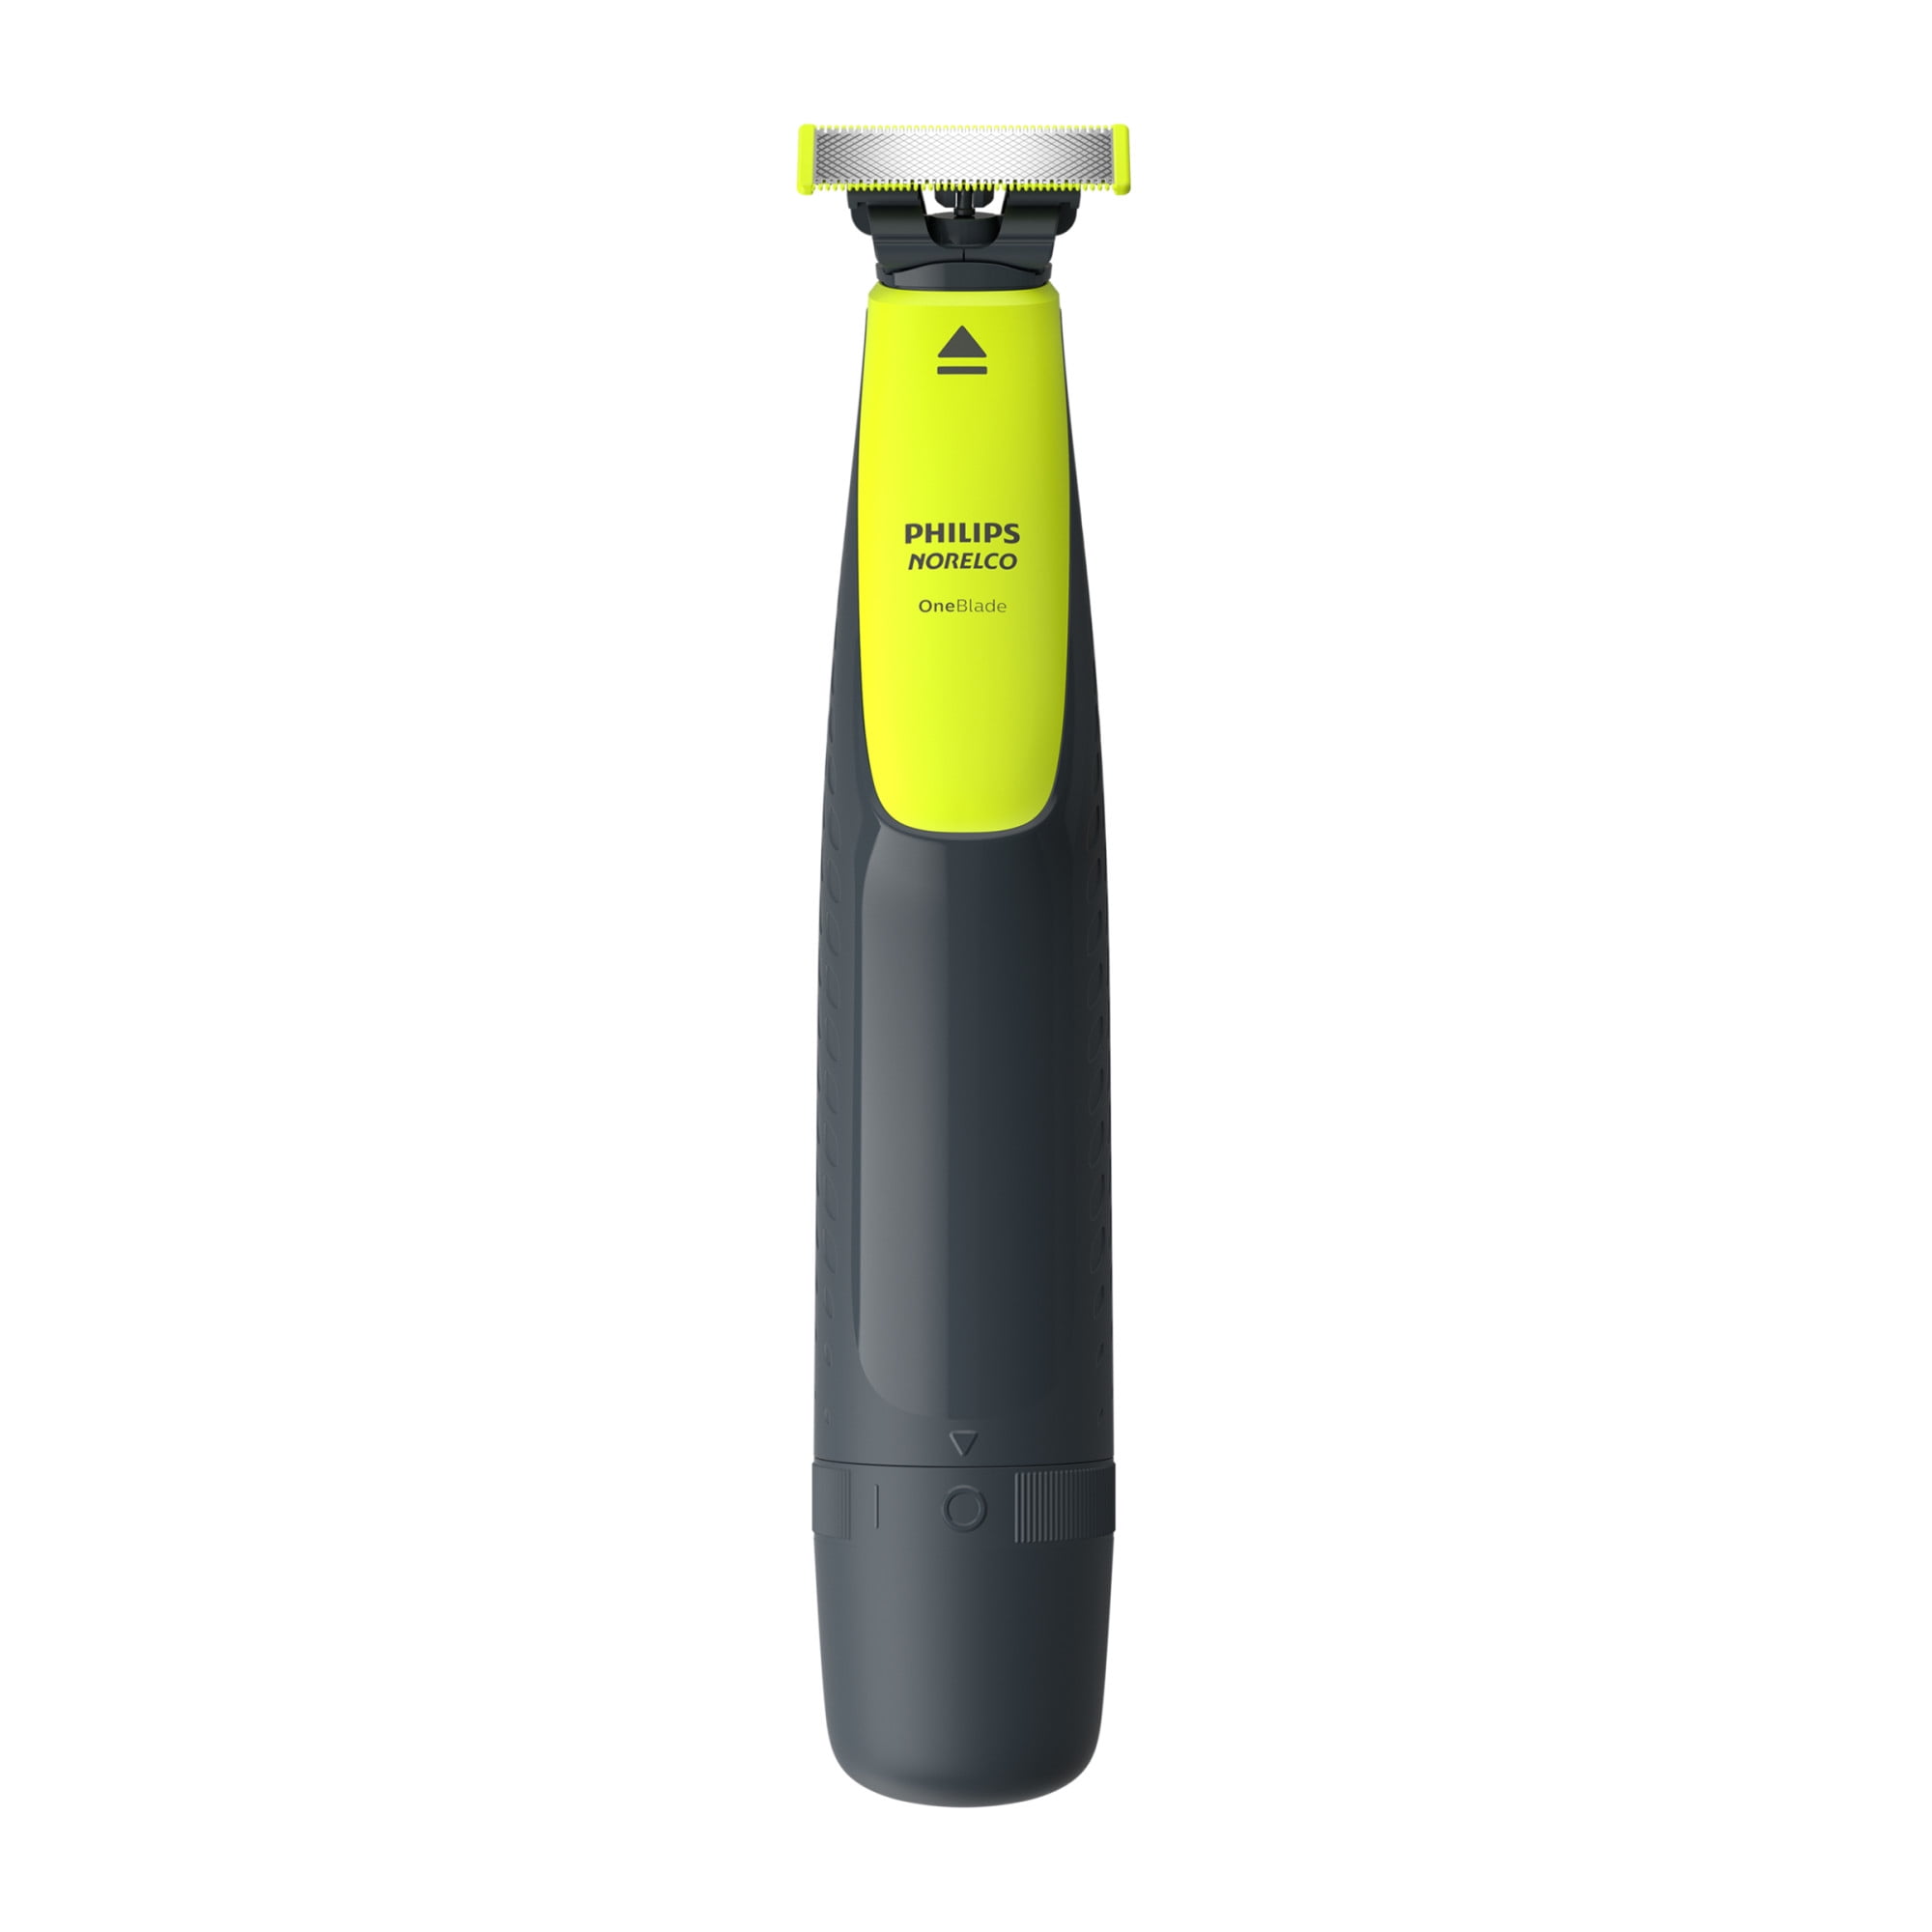 weed consumer remember Philips Norelco Oneblade Wet Aisle Hybrid Electric Trimmer and Shaver  QP2510/49 - Walmart.com